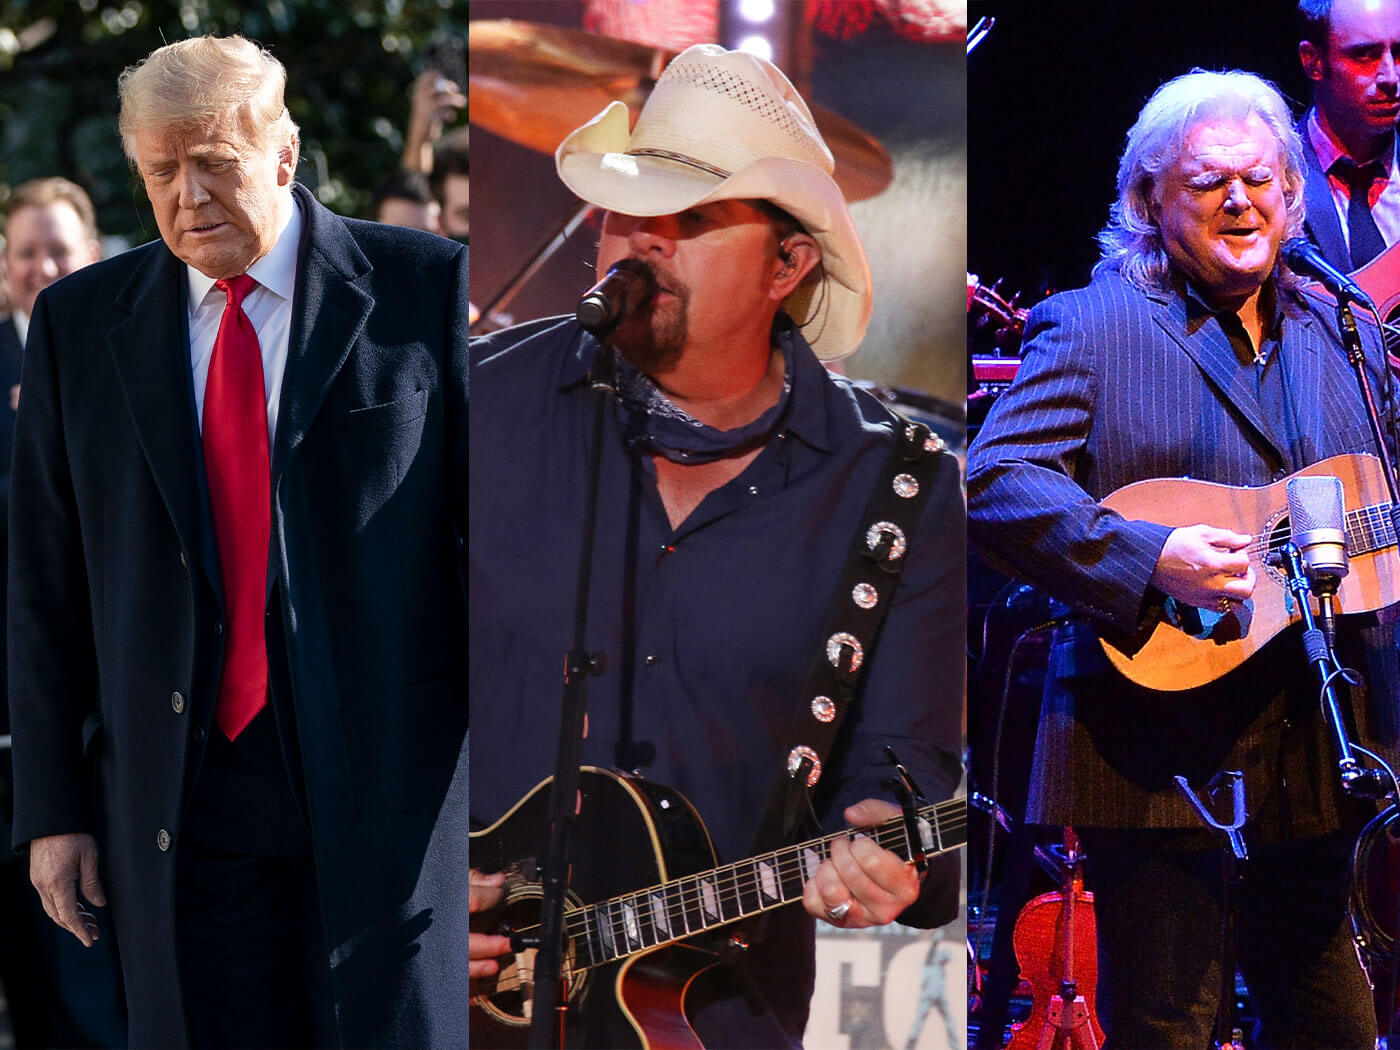 Donald Trump, Toby Keith and Ricky Skaggs